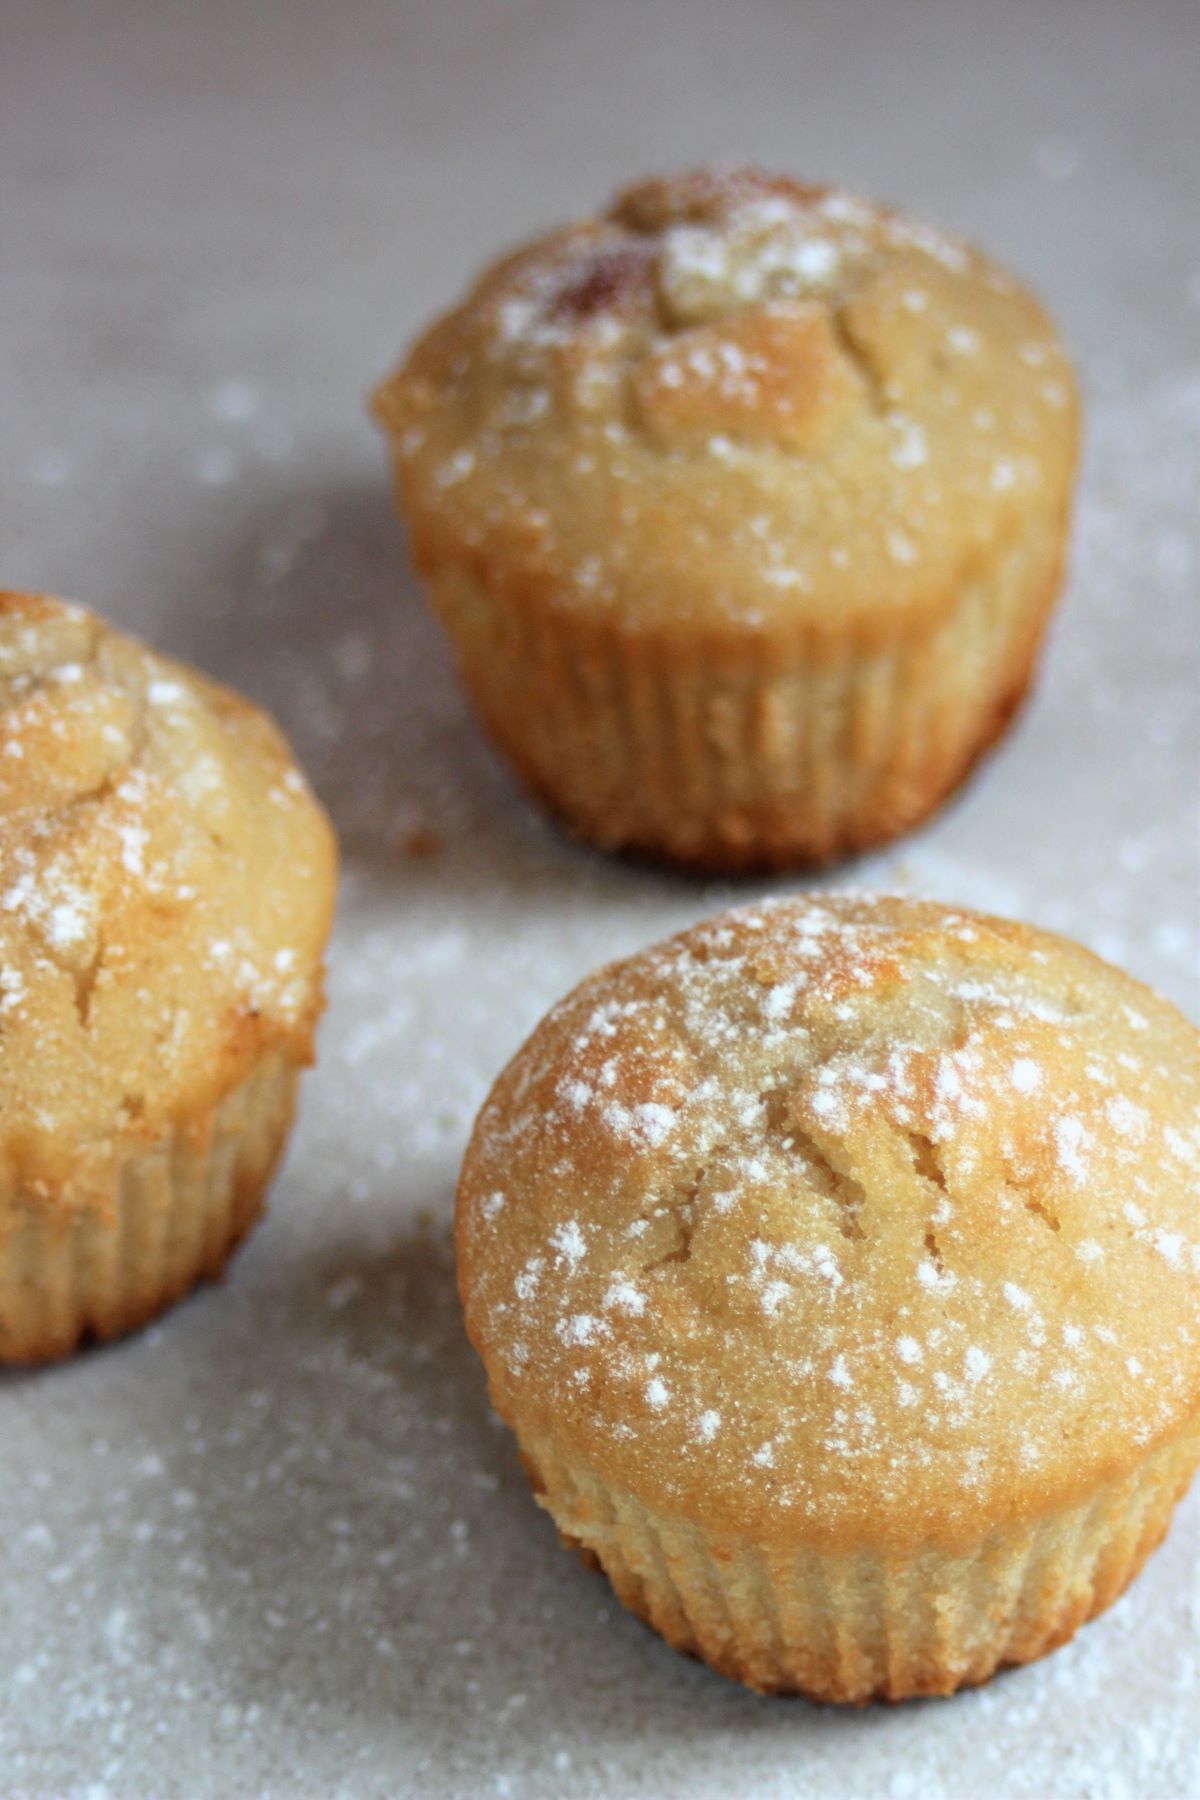 Pear and ginger muffins on a white surface.